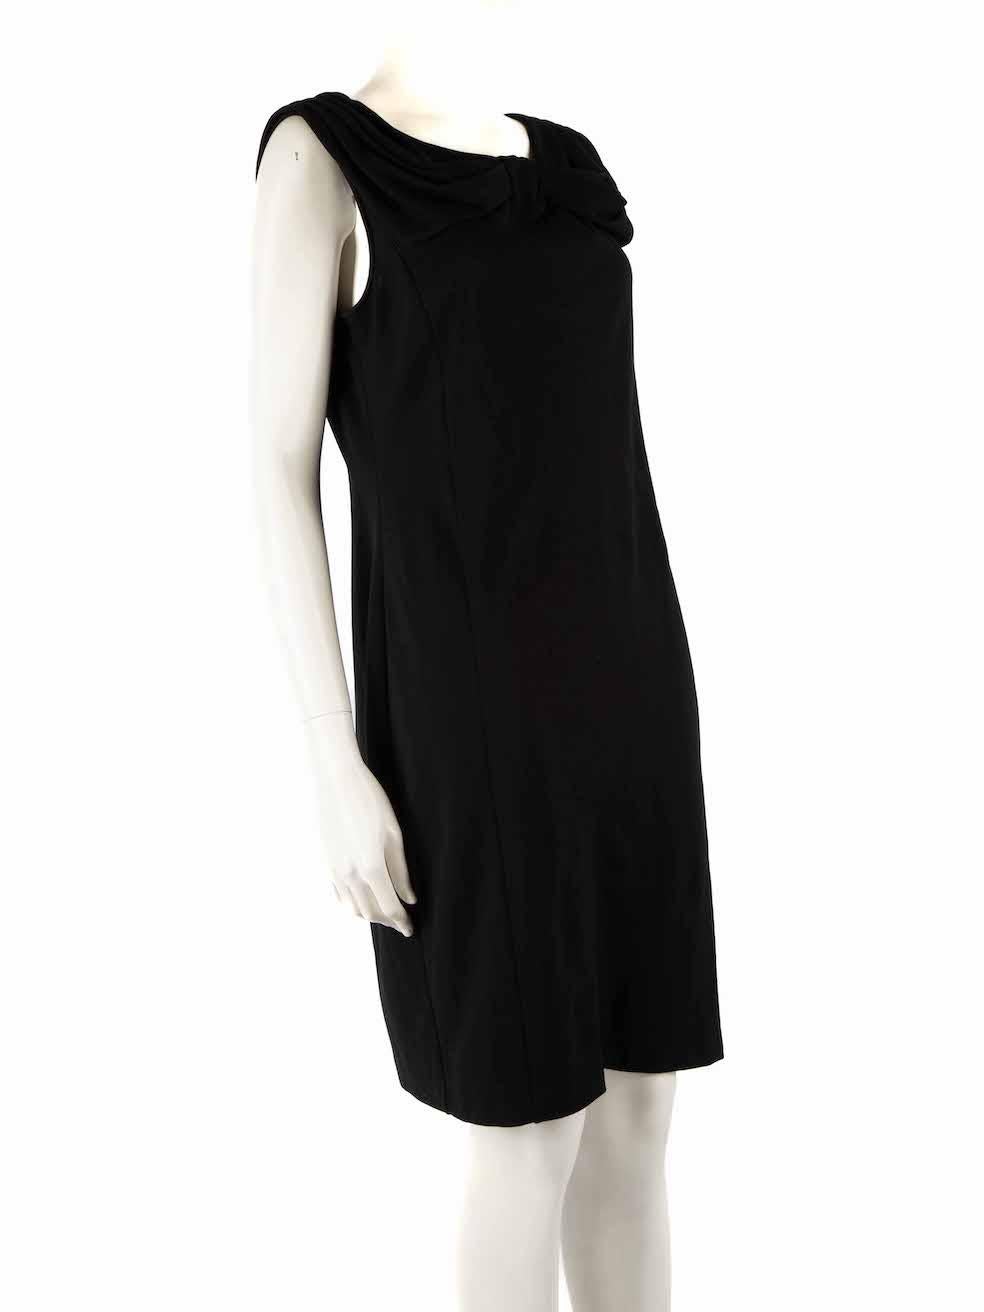 CONDITION is Very good. Minimal wear to dress is evident. Minimal wear to internal hem line with small discolouration marks seen on this used Armani Collezioni designer resale item.
 
 
 
 Details
 
 
 Black
 
 Synthetic
 
 Dress
 
 Knee length
 
